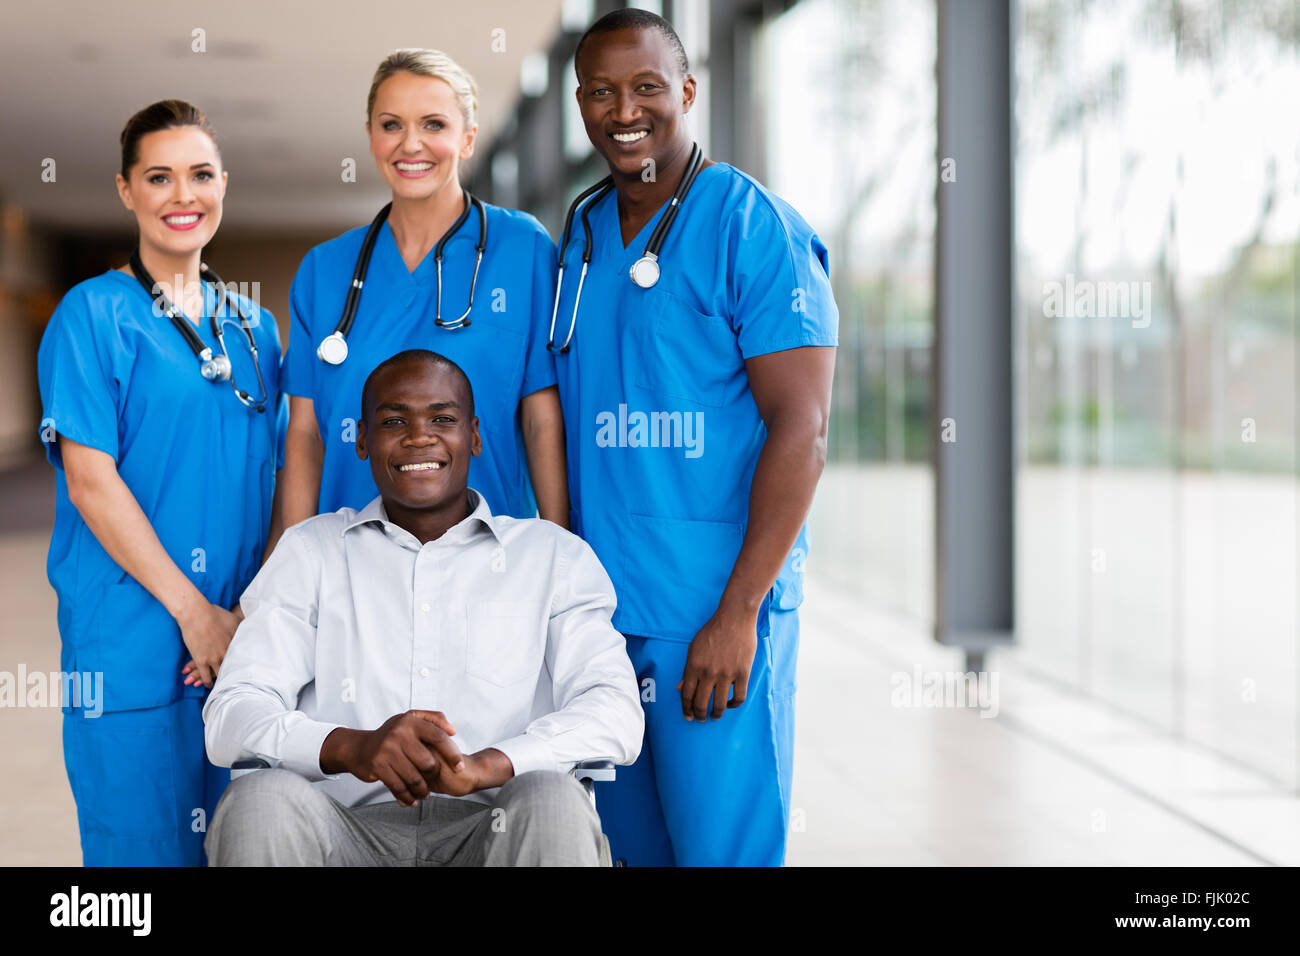 professional health workers and disabled patient Stock Photo